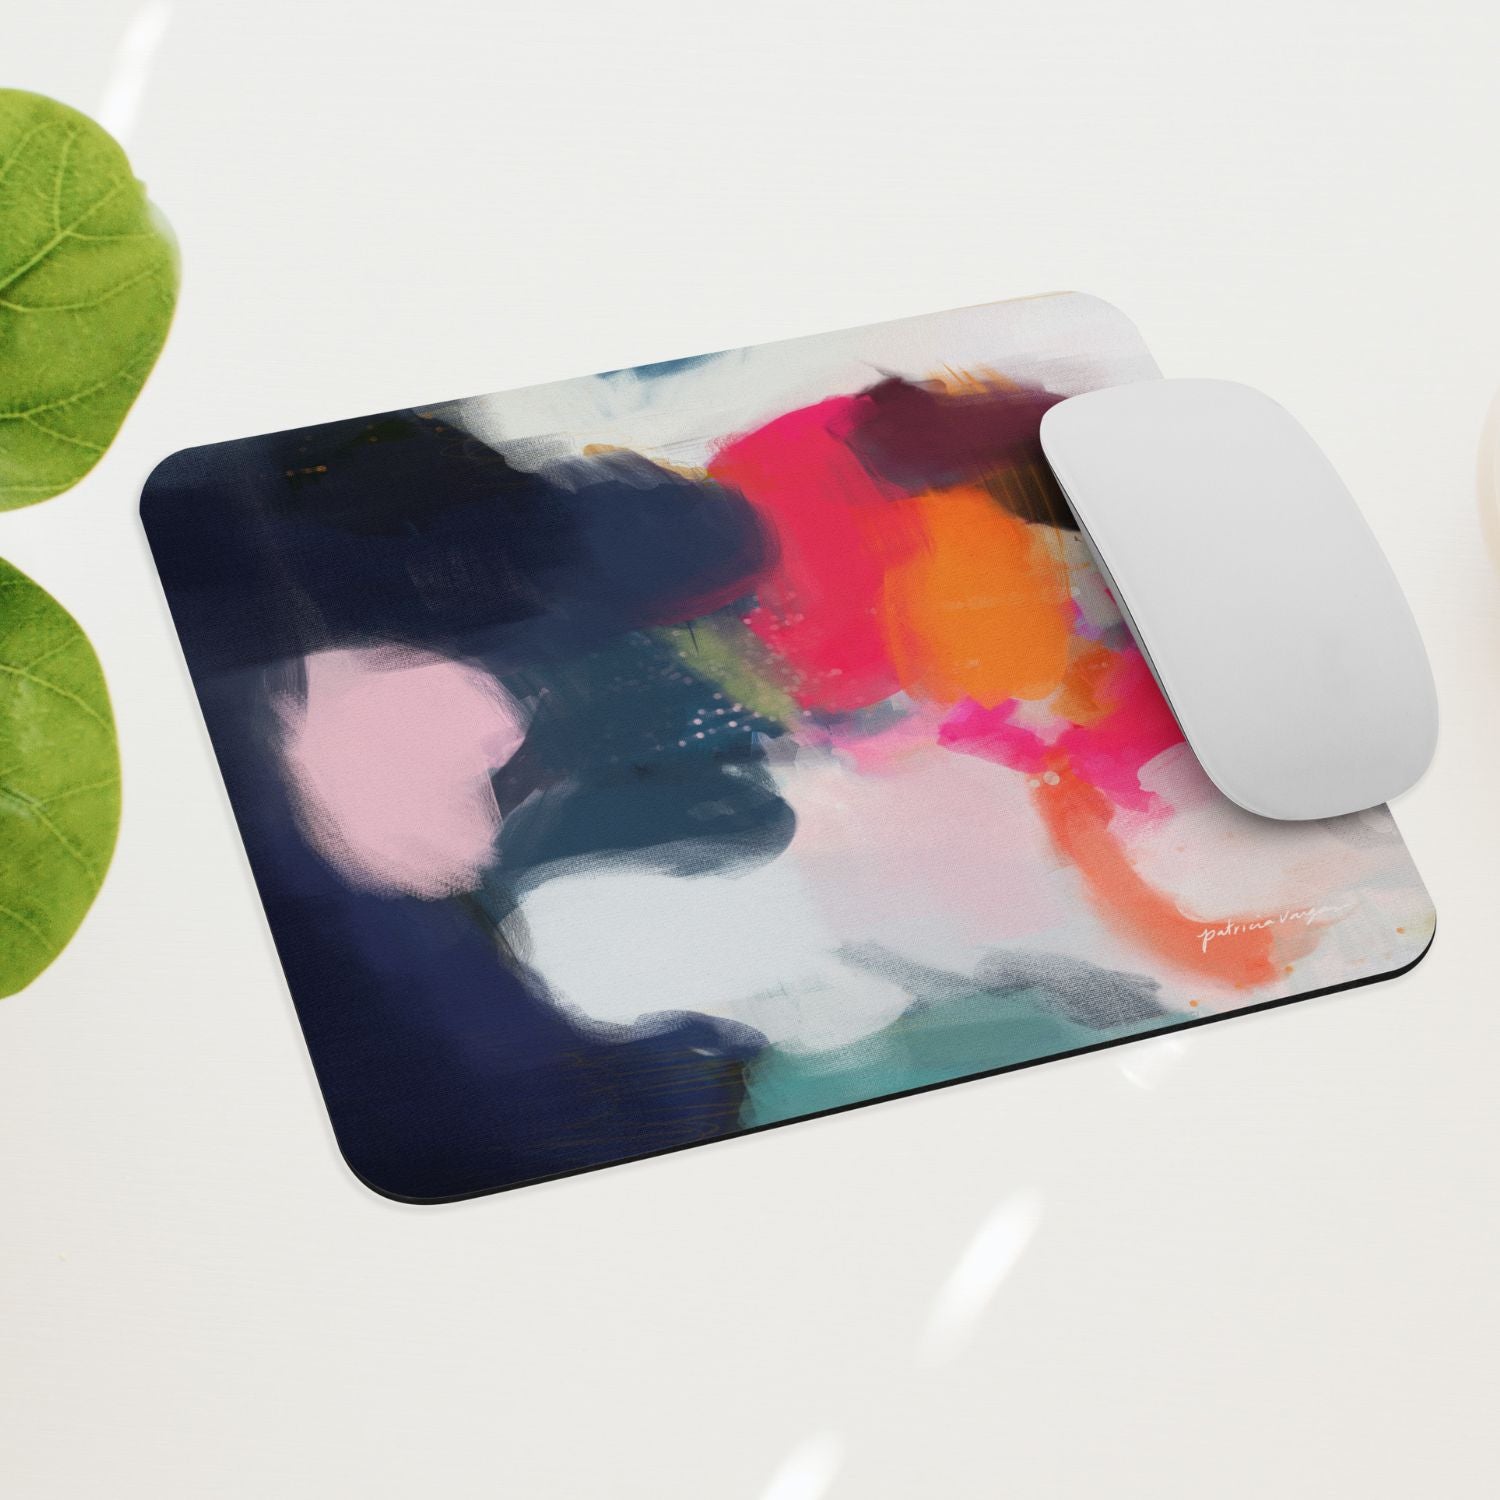 Eliza, blue and pink mouse pad for styling your office desk. Featuring artwork by Parima Studio. Home office styling accessories, cubicle styling accessories.